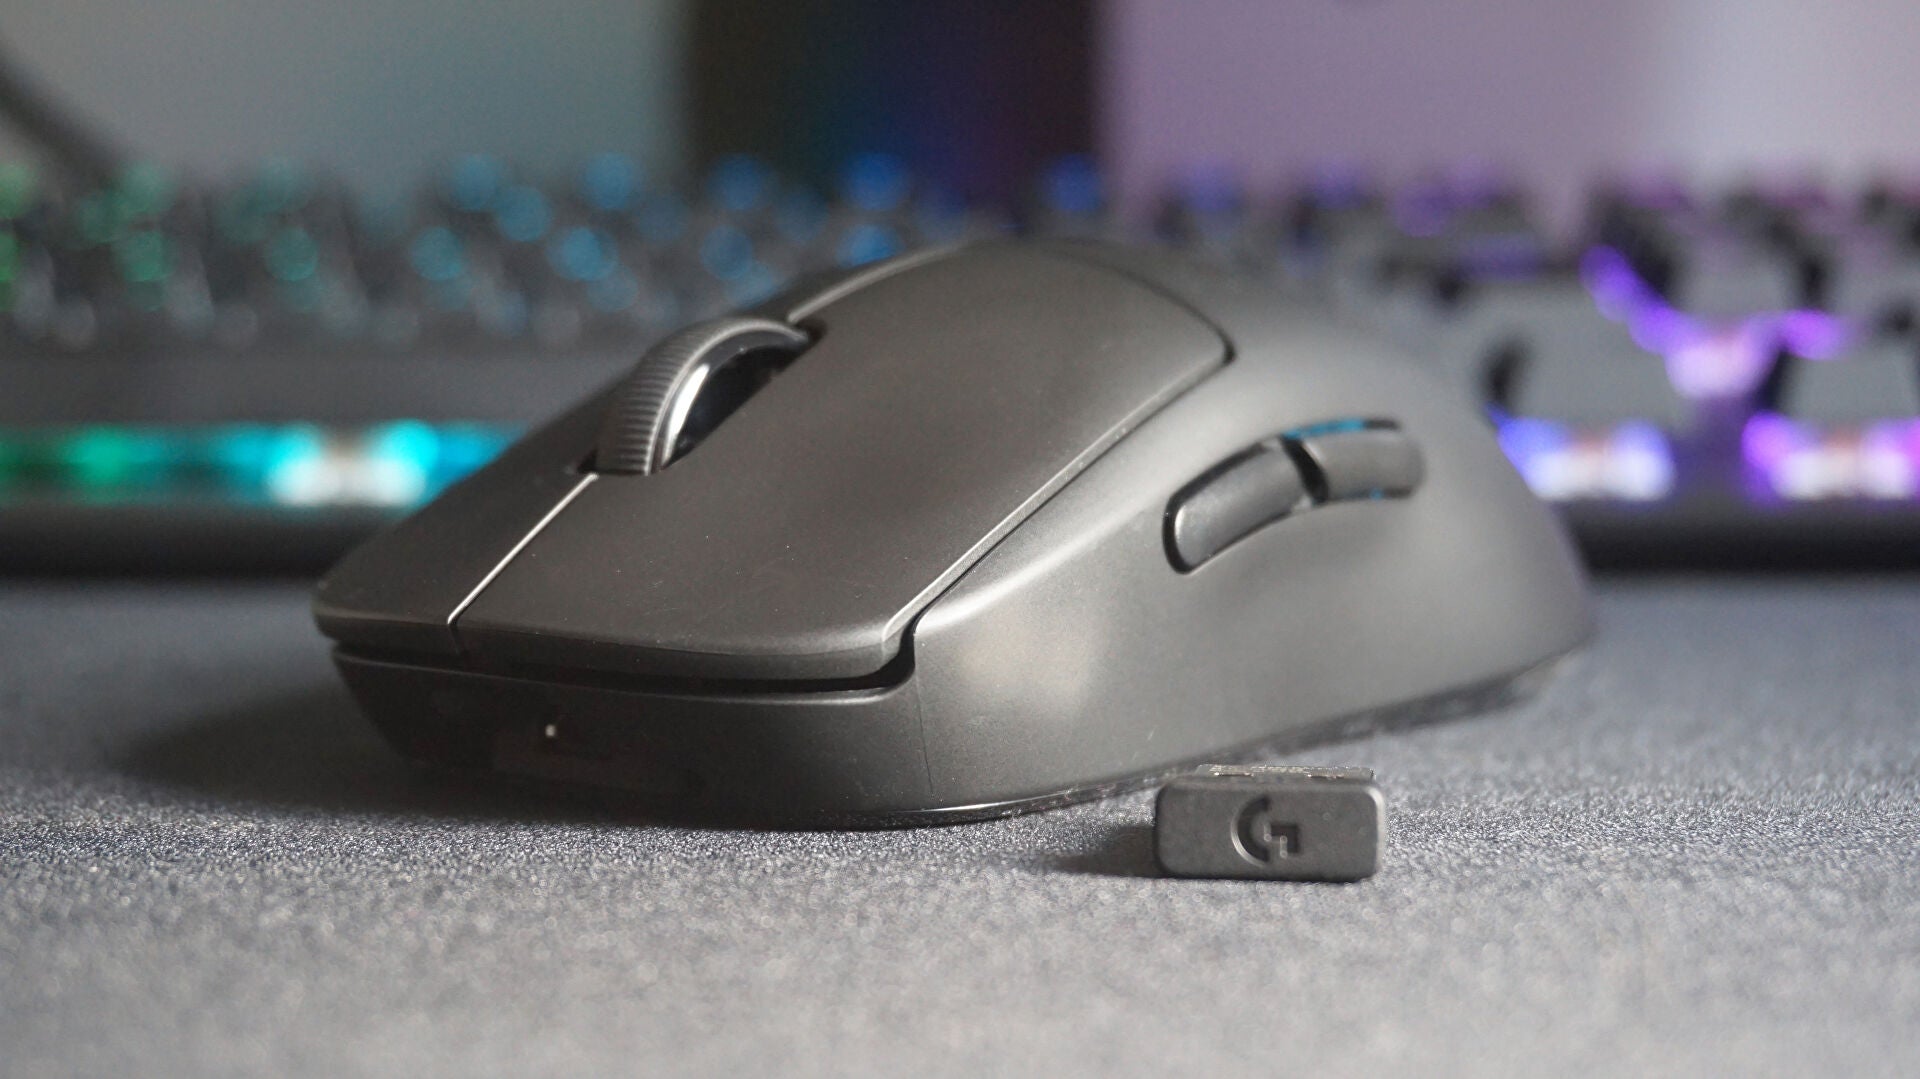 The Logitech G Pro Wireless gaming mouse on a desk.